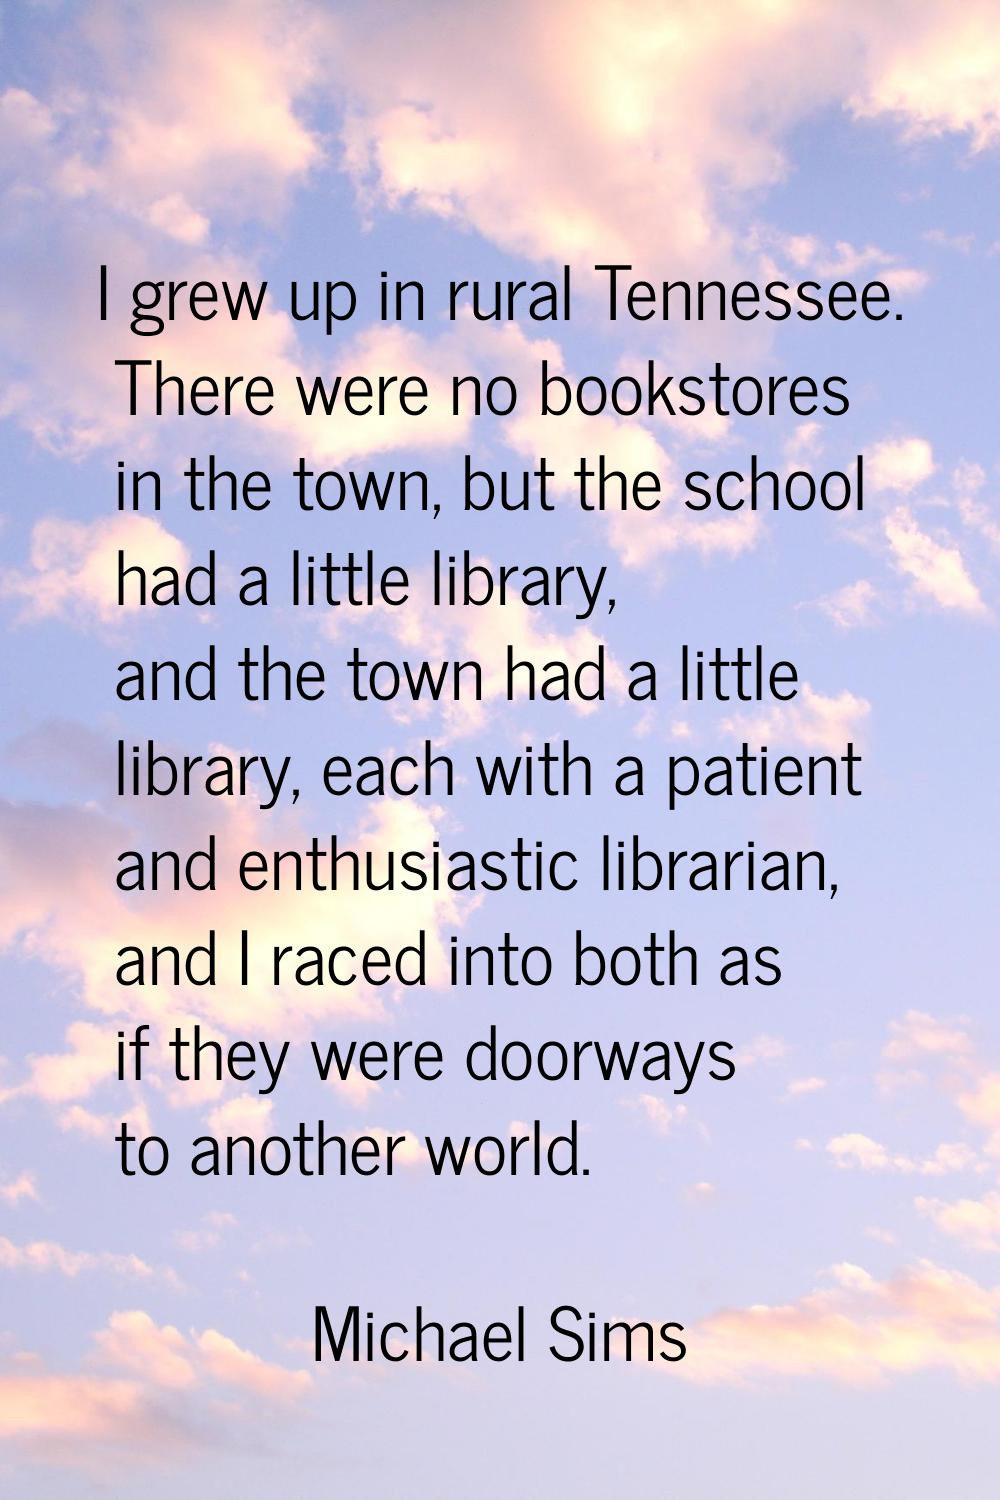 I grew up in rural Tennessee. There were no bookstores in the town, but the school had a little lib